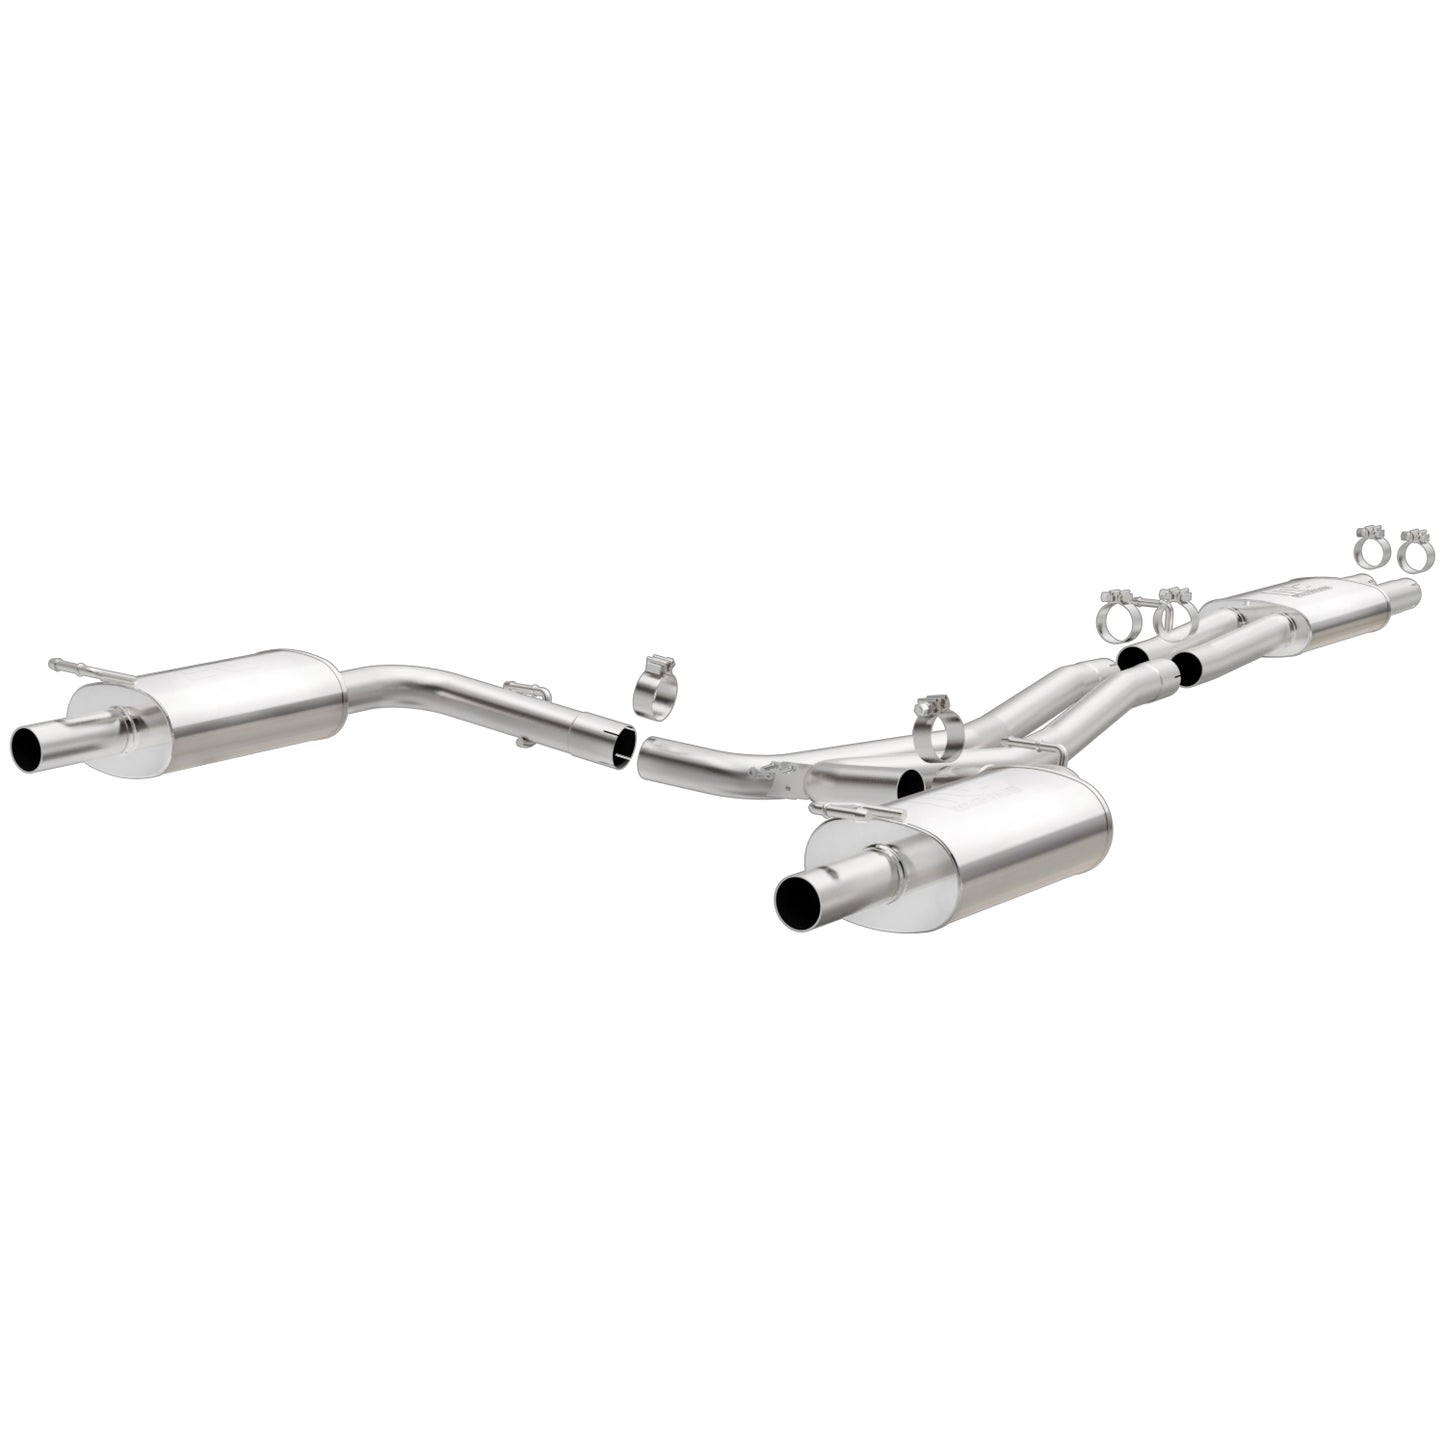 MagnaFlow Street Series Cat-Back Performance Exhaust System 19273